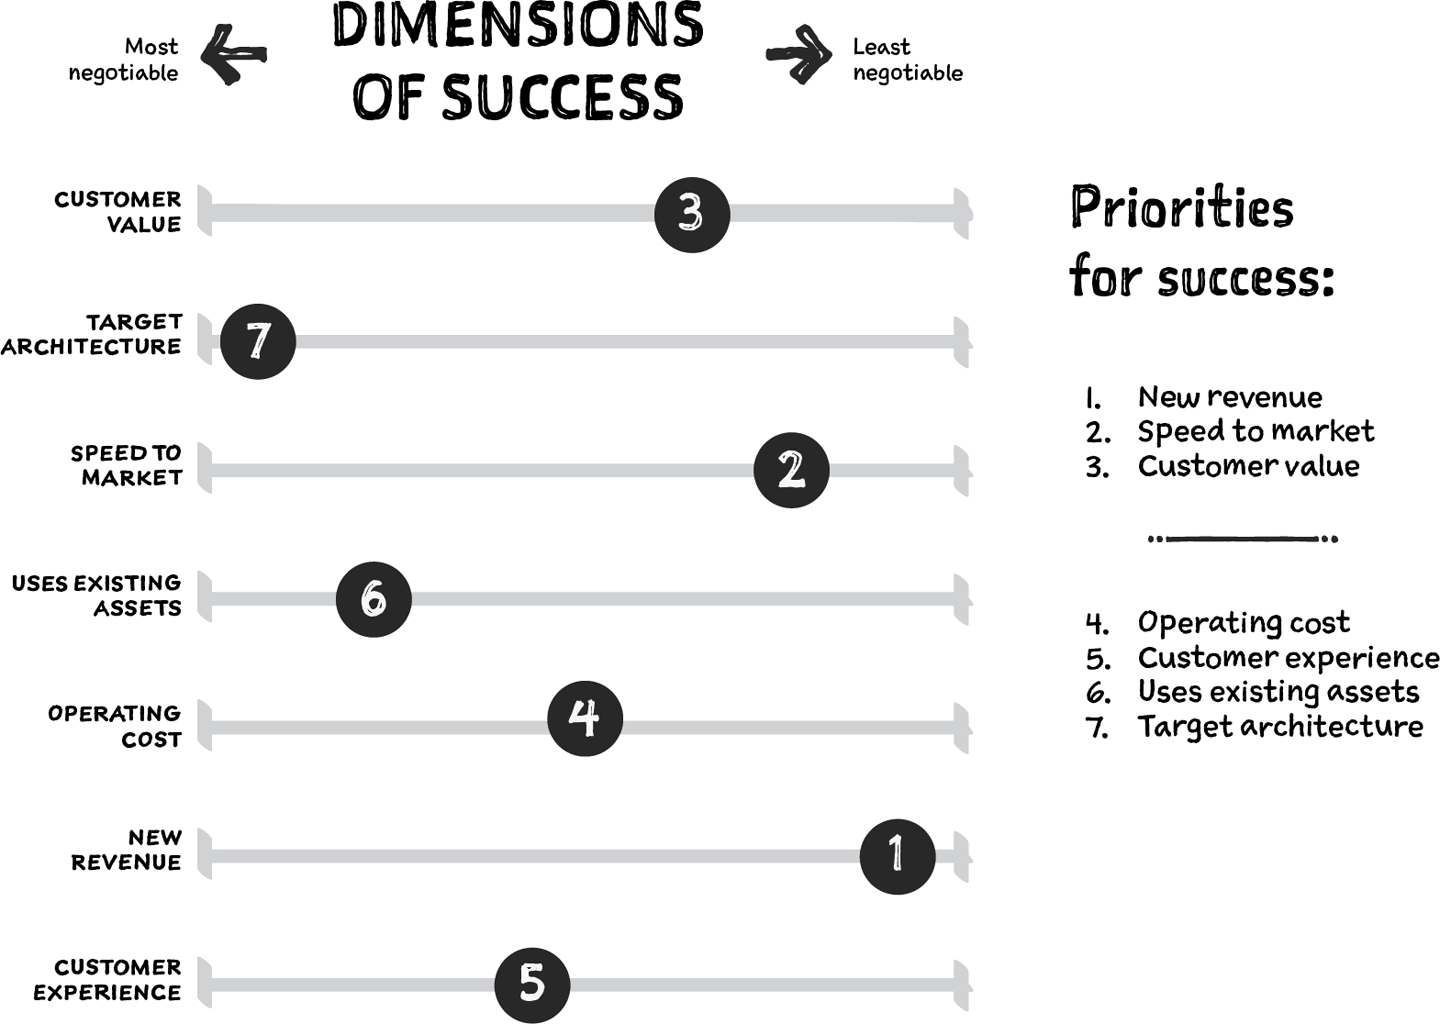 Dimensions of success for a digital team